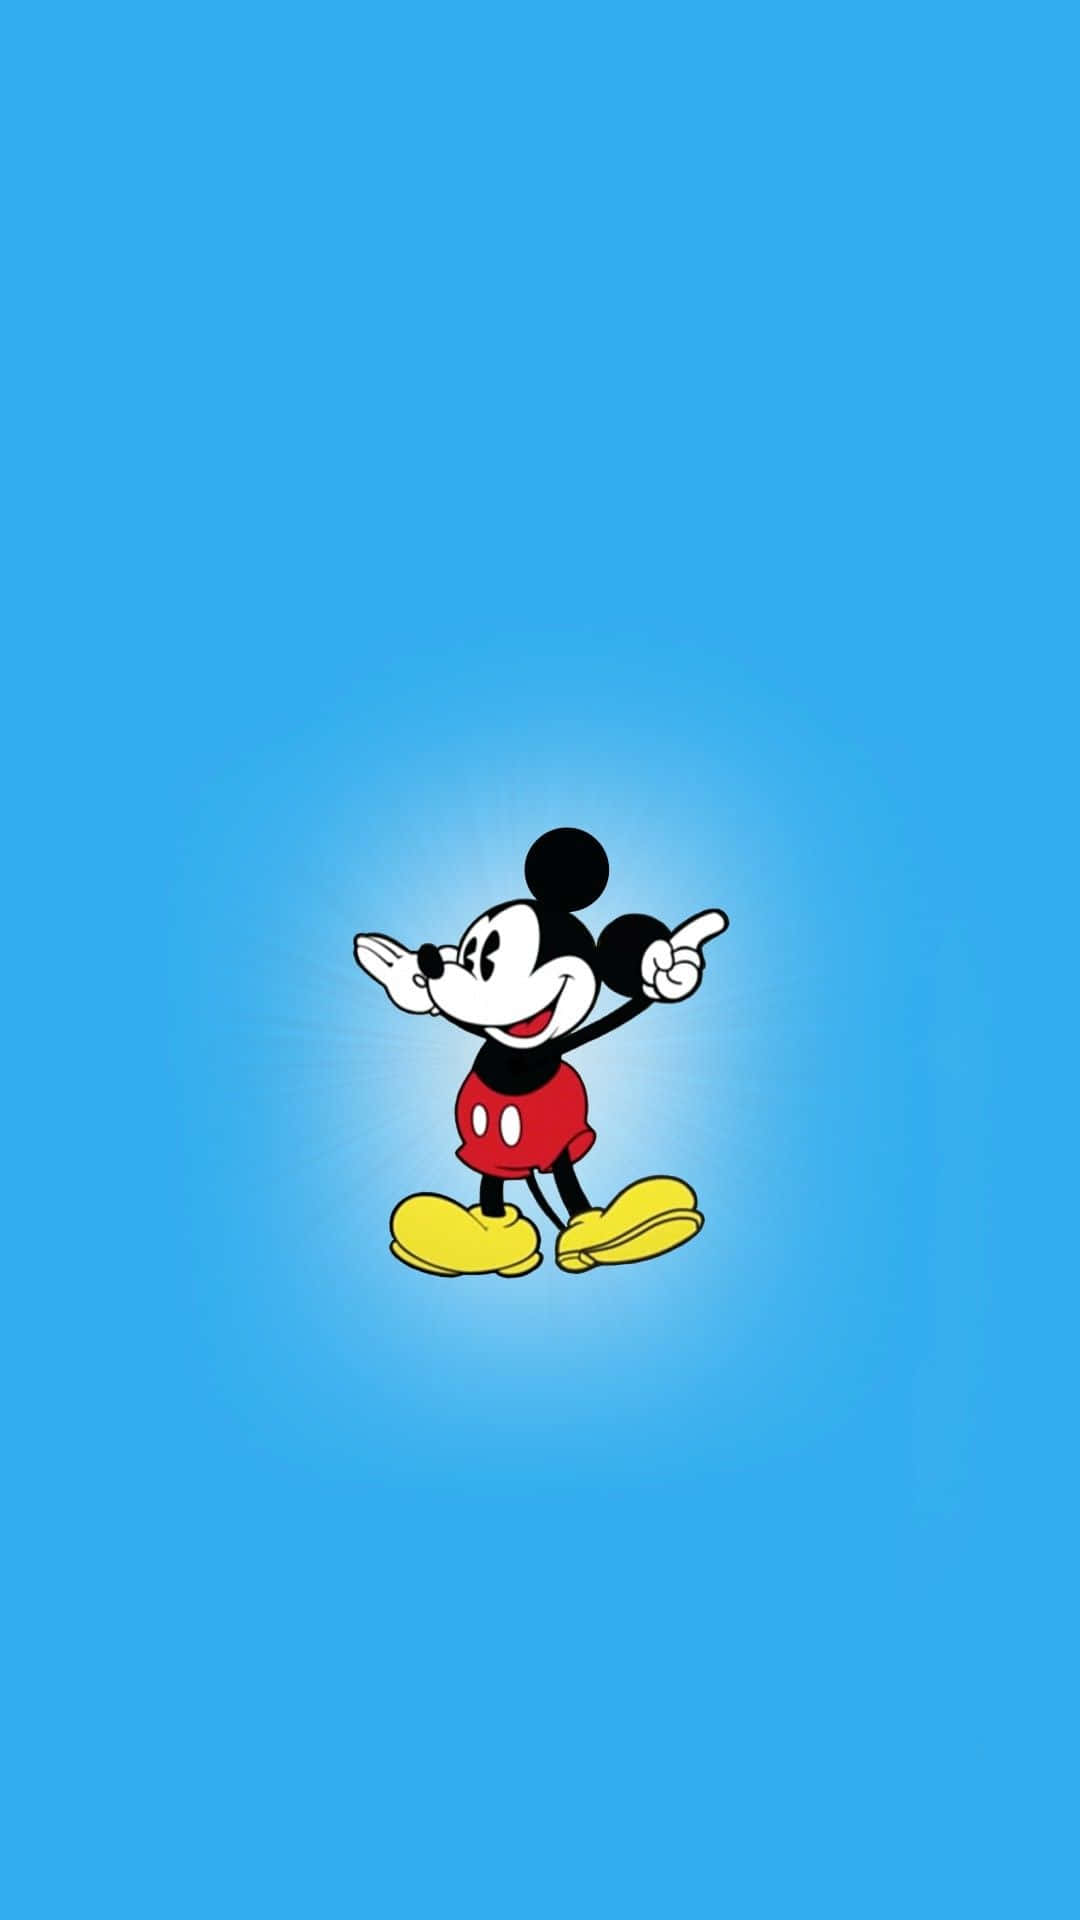 Captivating Image Of America's Beloved Animated Character, Mickey Mouse Against A Vibrant And Colorful Background.